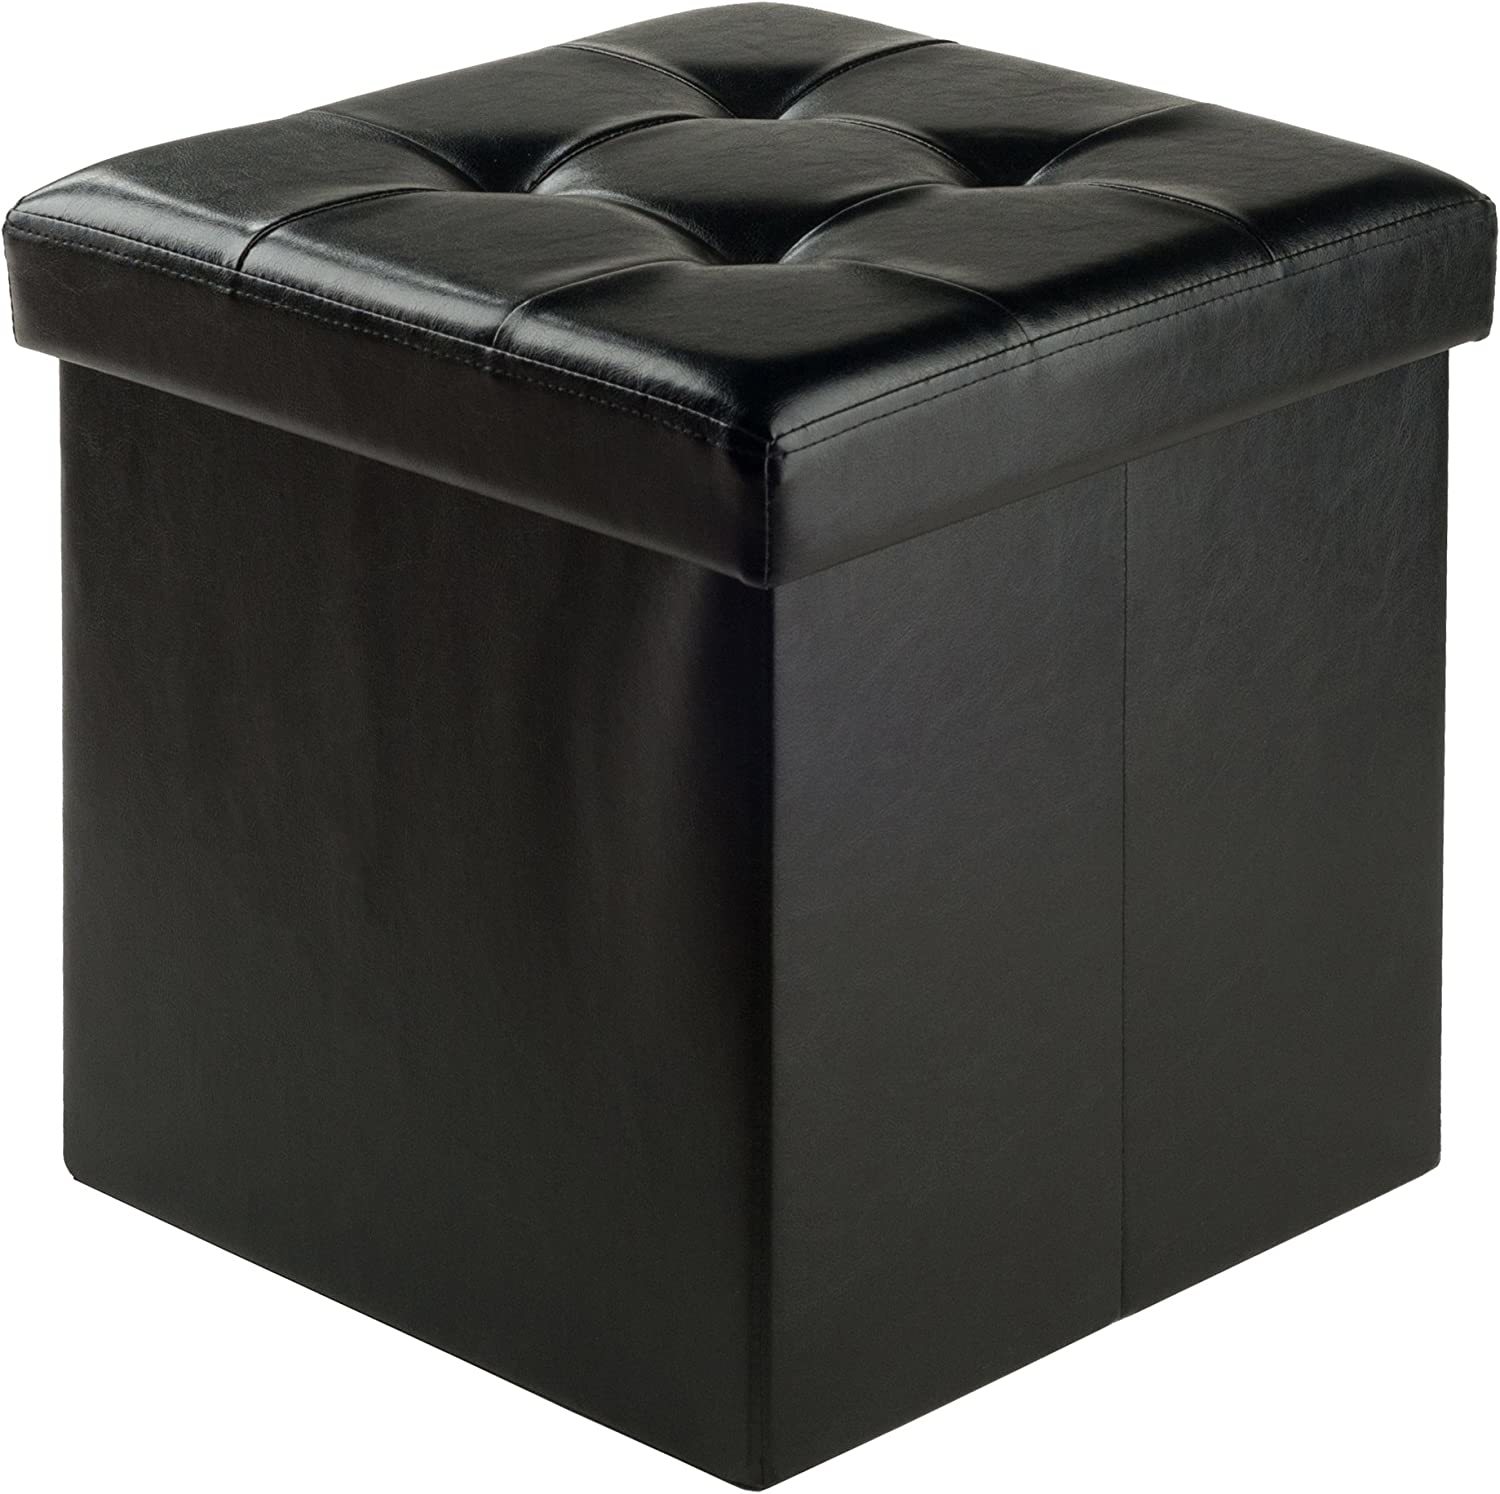 Winsome Wood Furniture Piece Ashford Ottoman With Storage Faux Leather, Black - $38.99